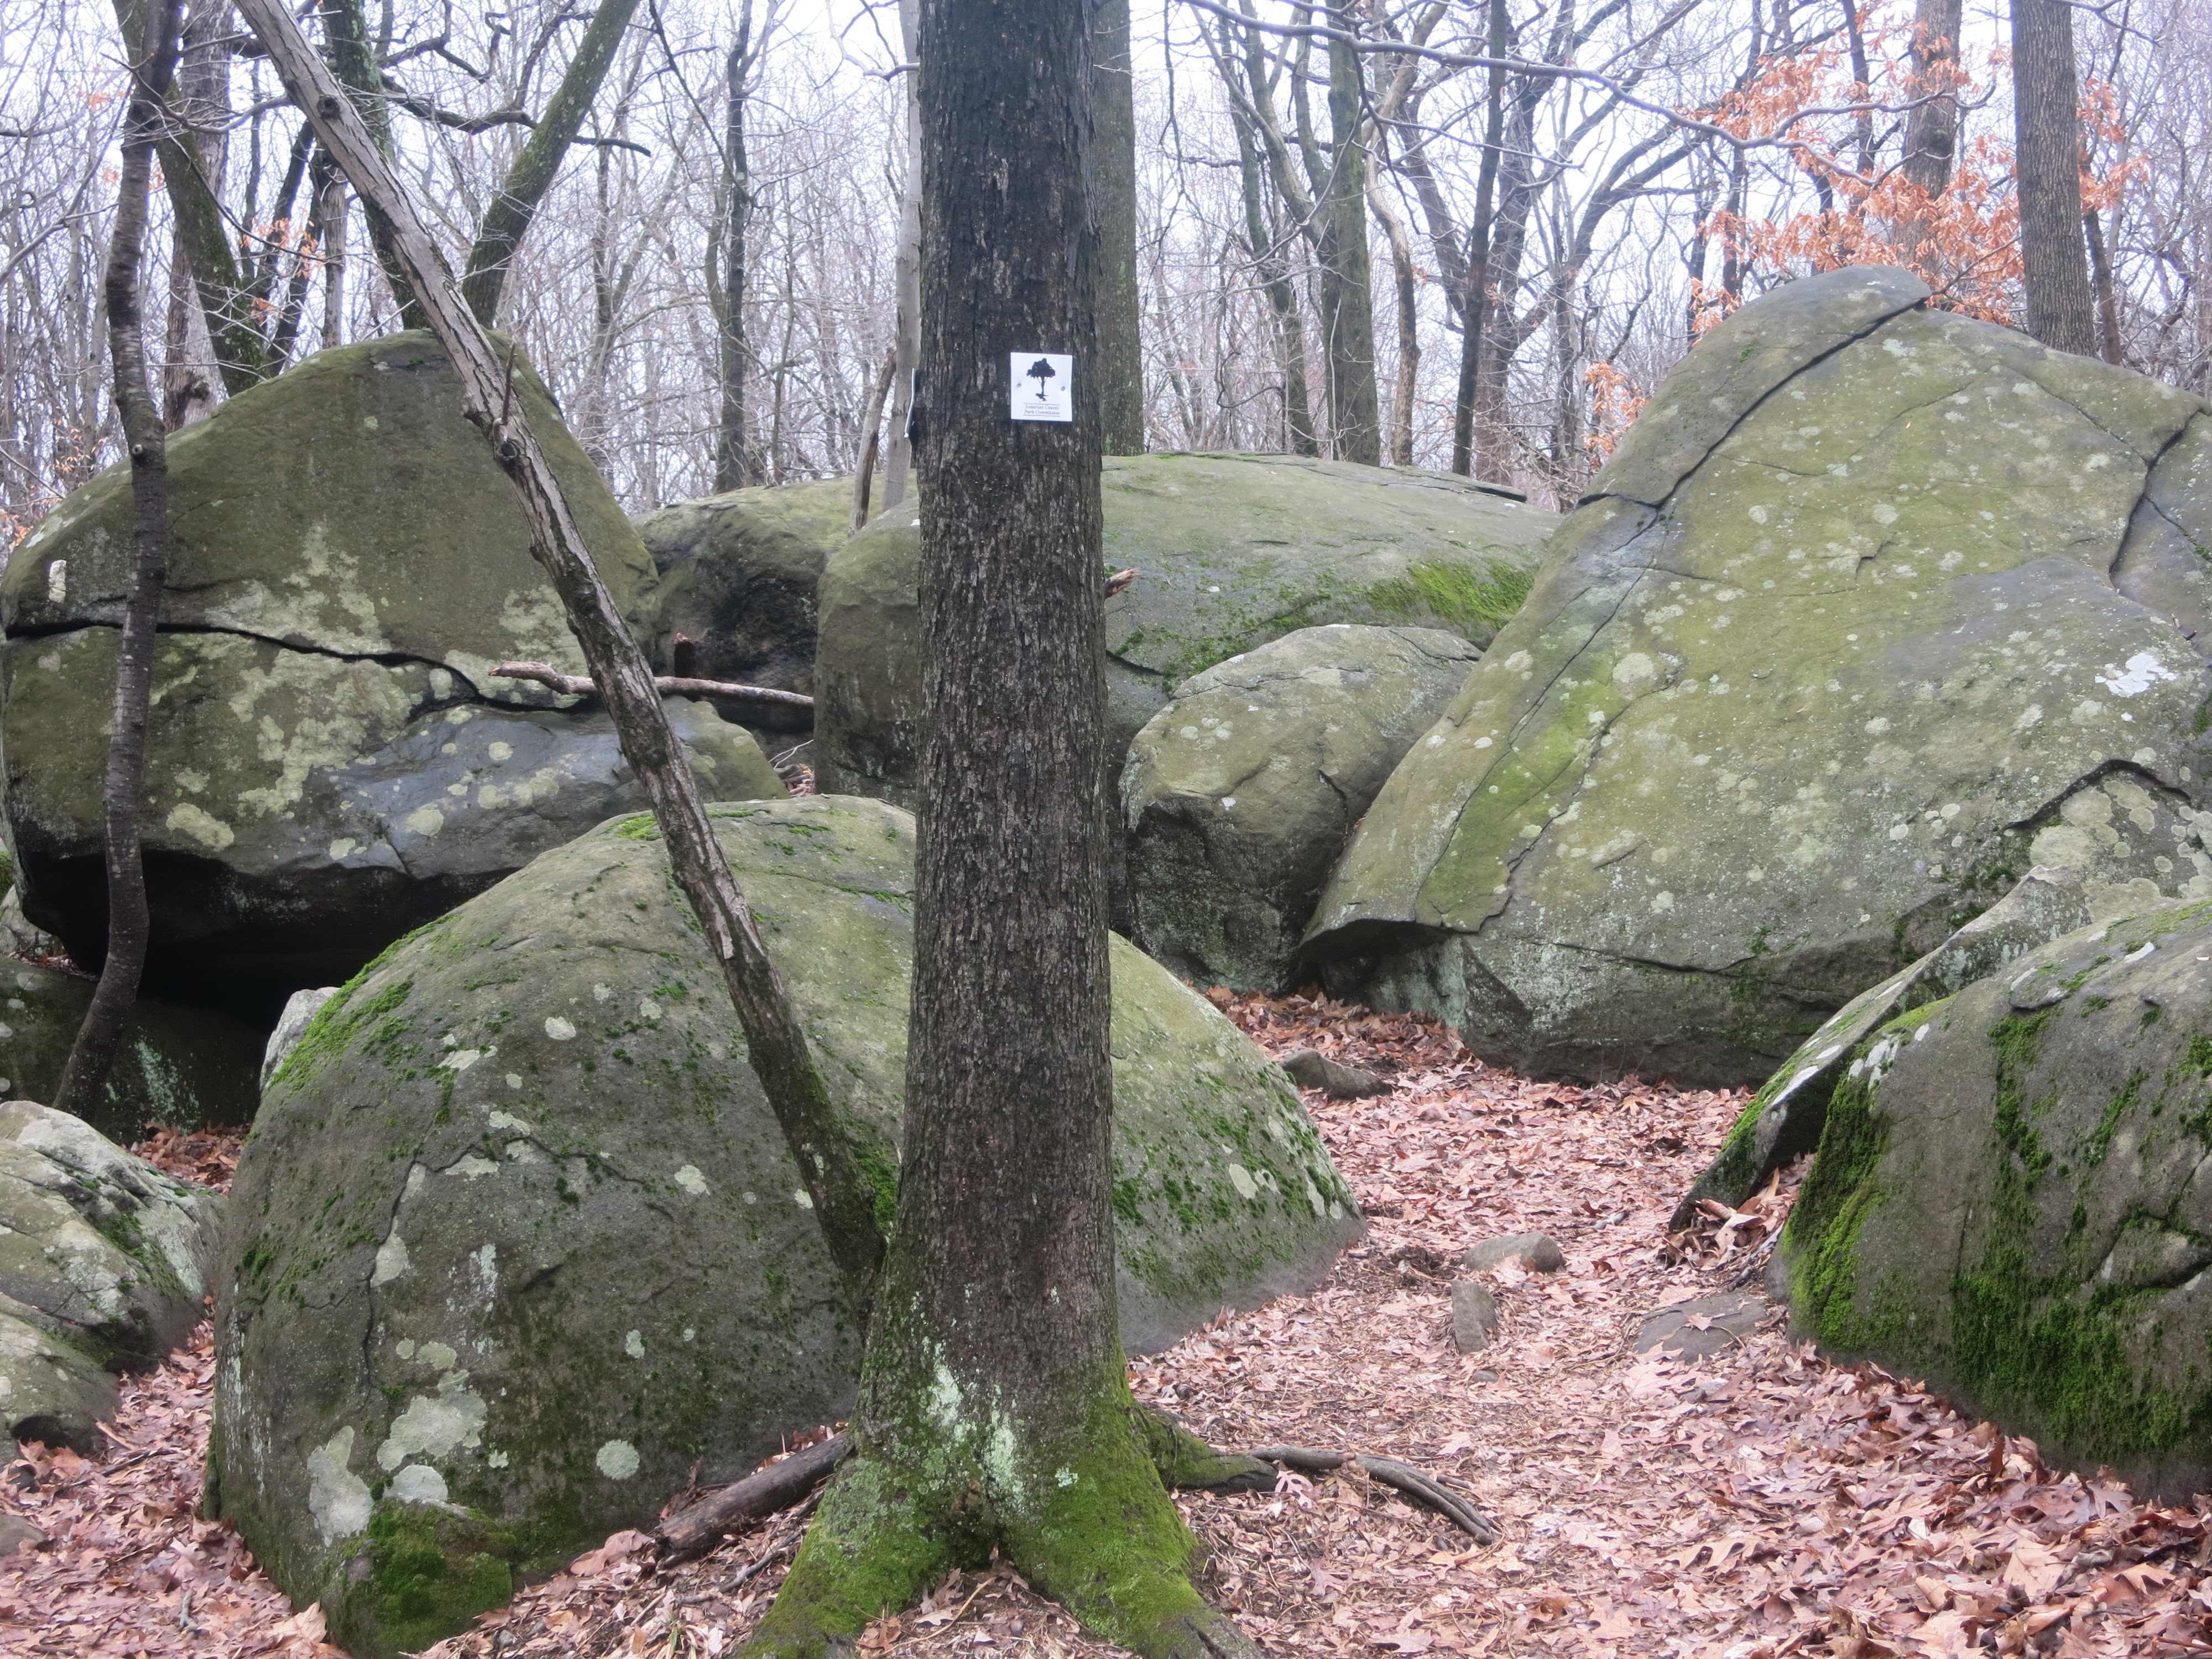 White Square Trail as it passes by a group of boulders -- Photo by Daniel Chazin